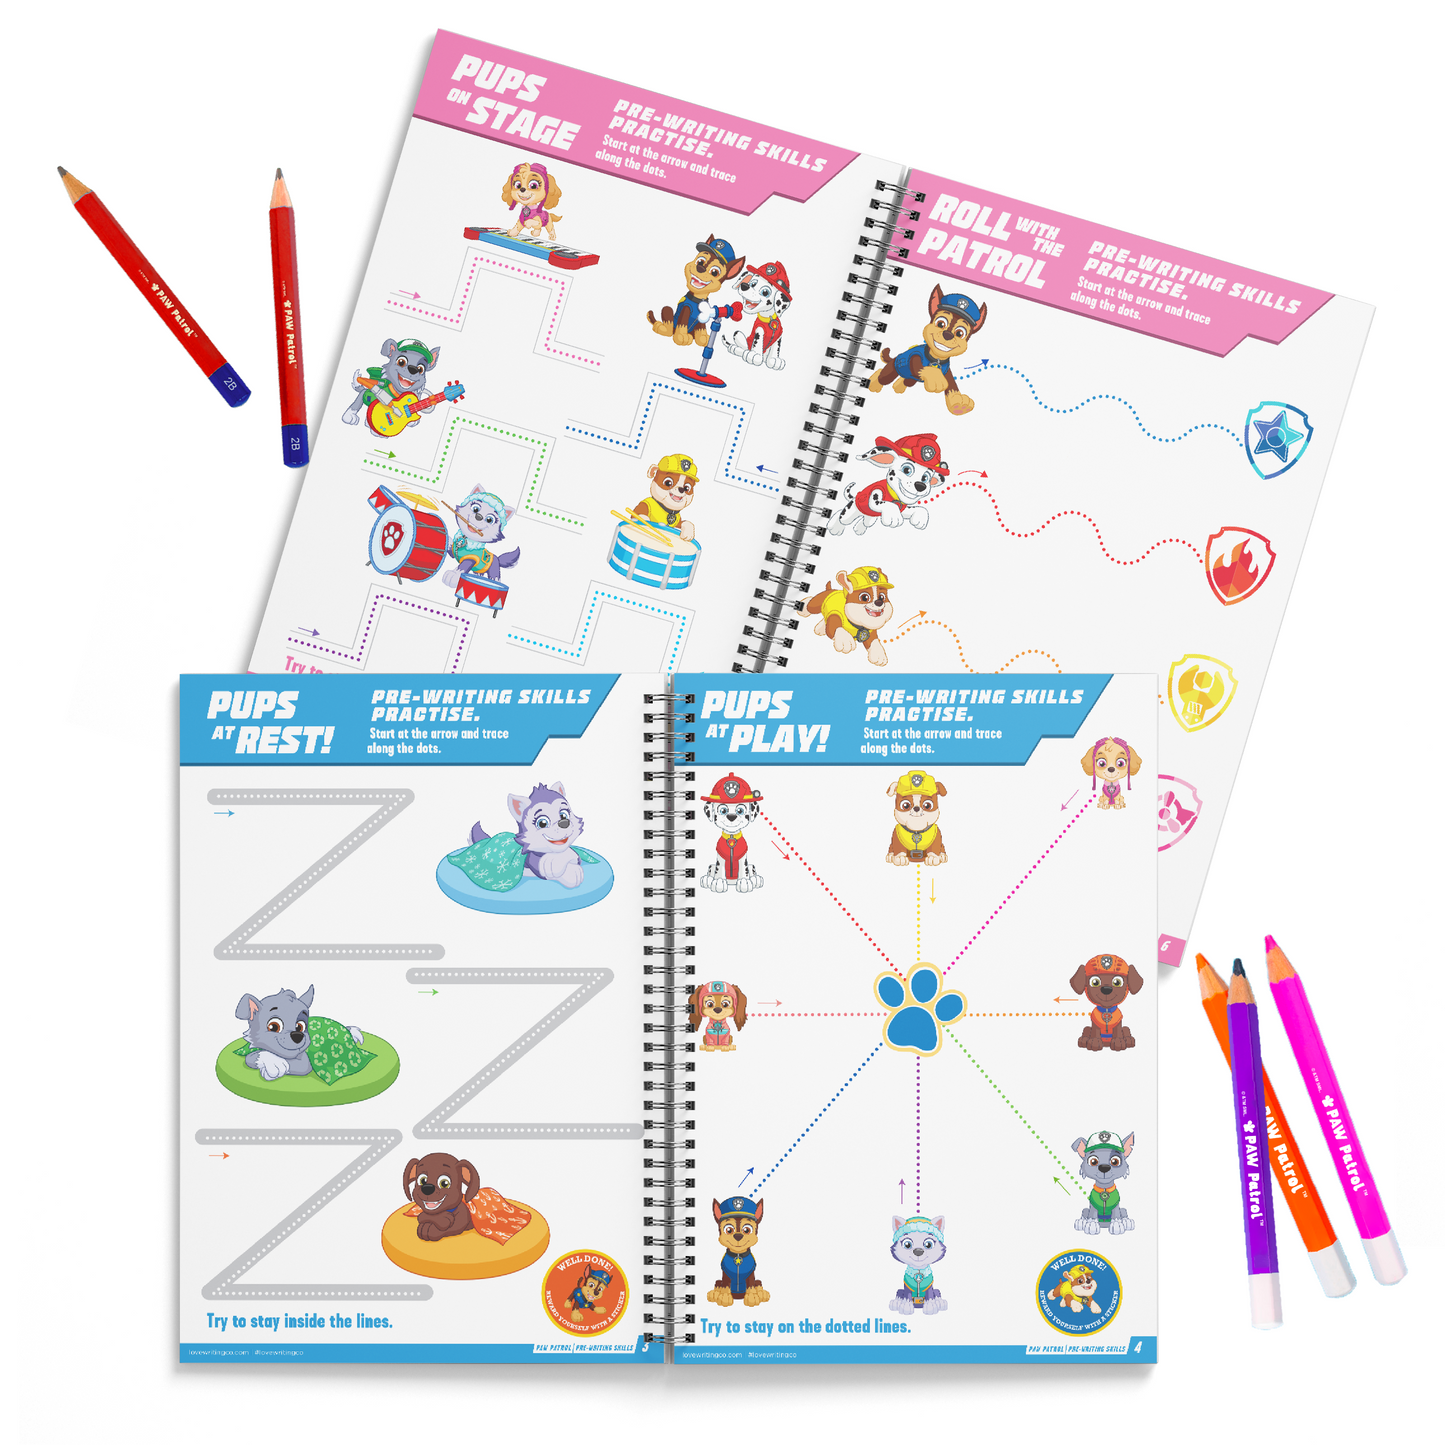 My First PAW PATROL Pre-Writing Skills Bundle | First Writing Steps Ages 2+